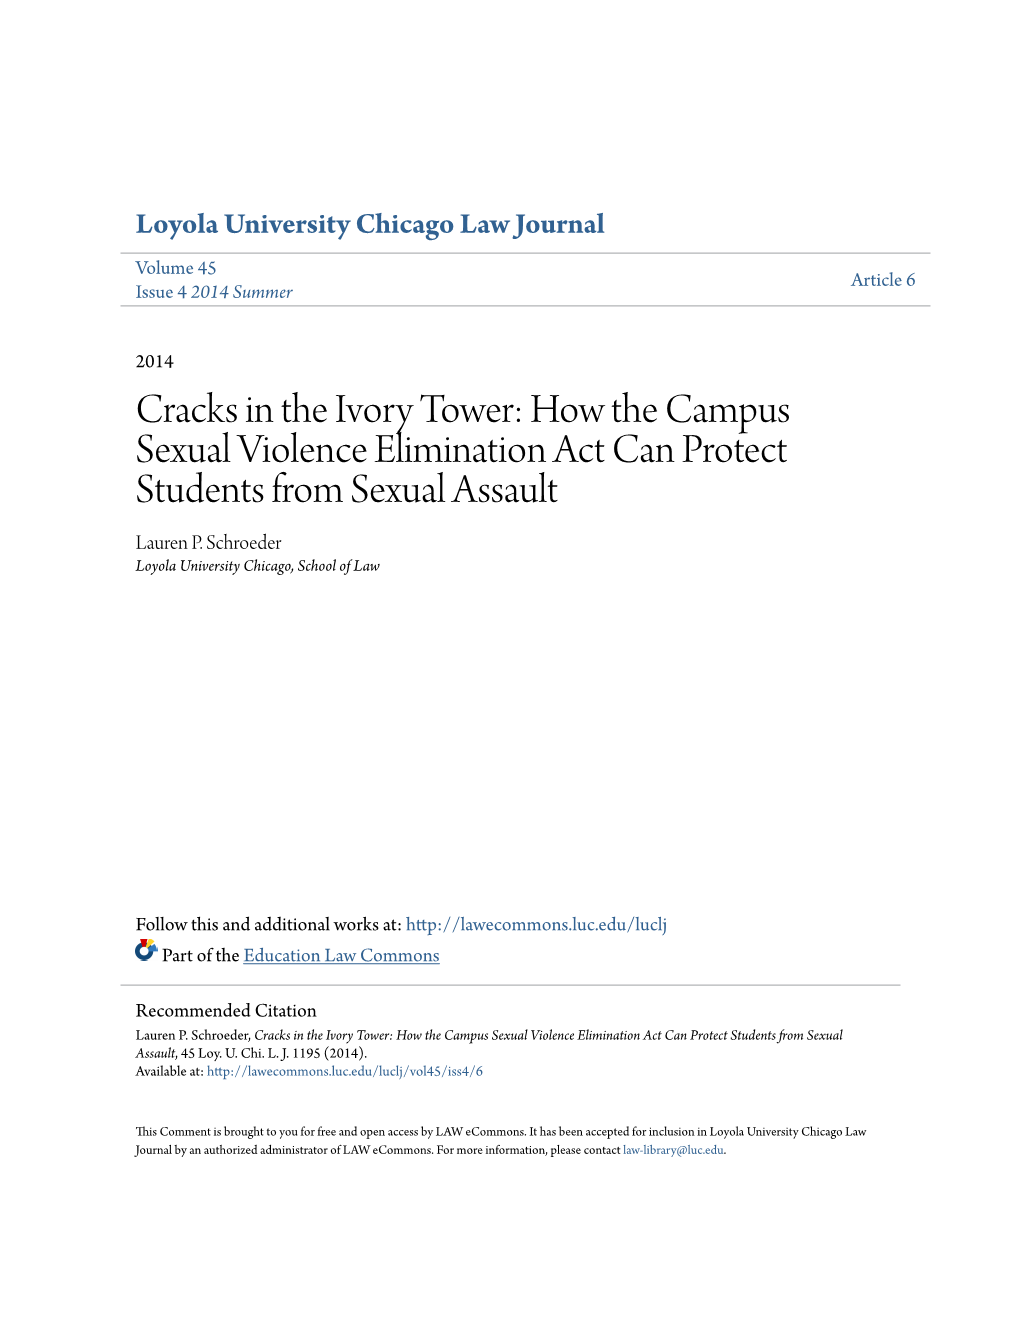 How the Campus Sexual Violence Elimination Act Can Protect Students from Sexual Assault Lauren P